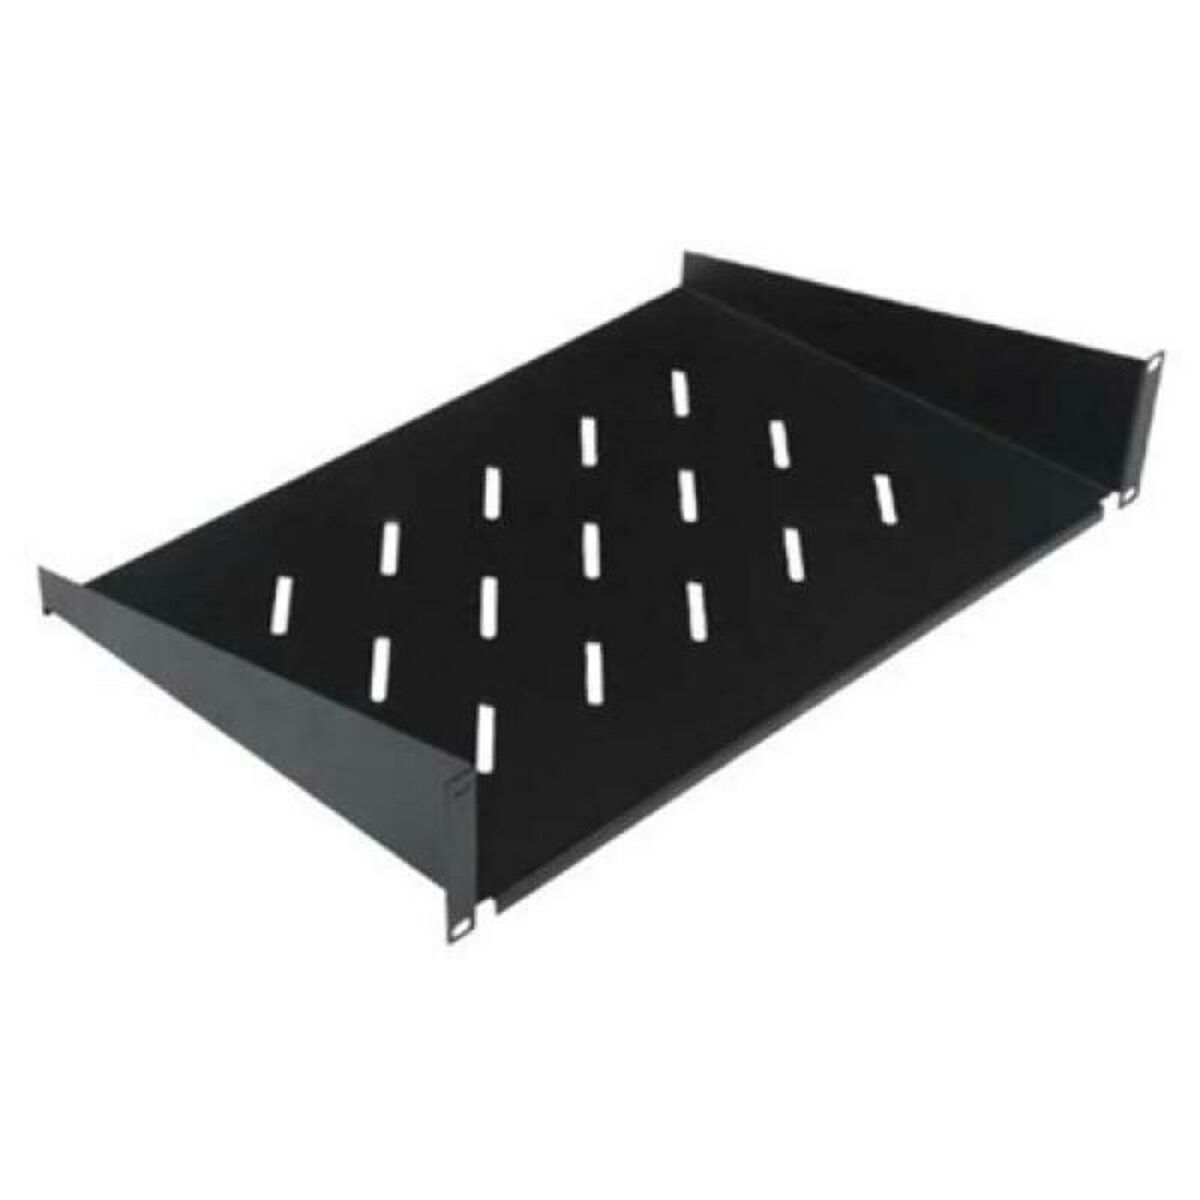 Fixed Tray for Rack Cabinet WP AWPN-AFS-22035-B 2 U 350 mm-0